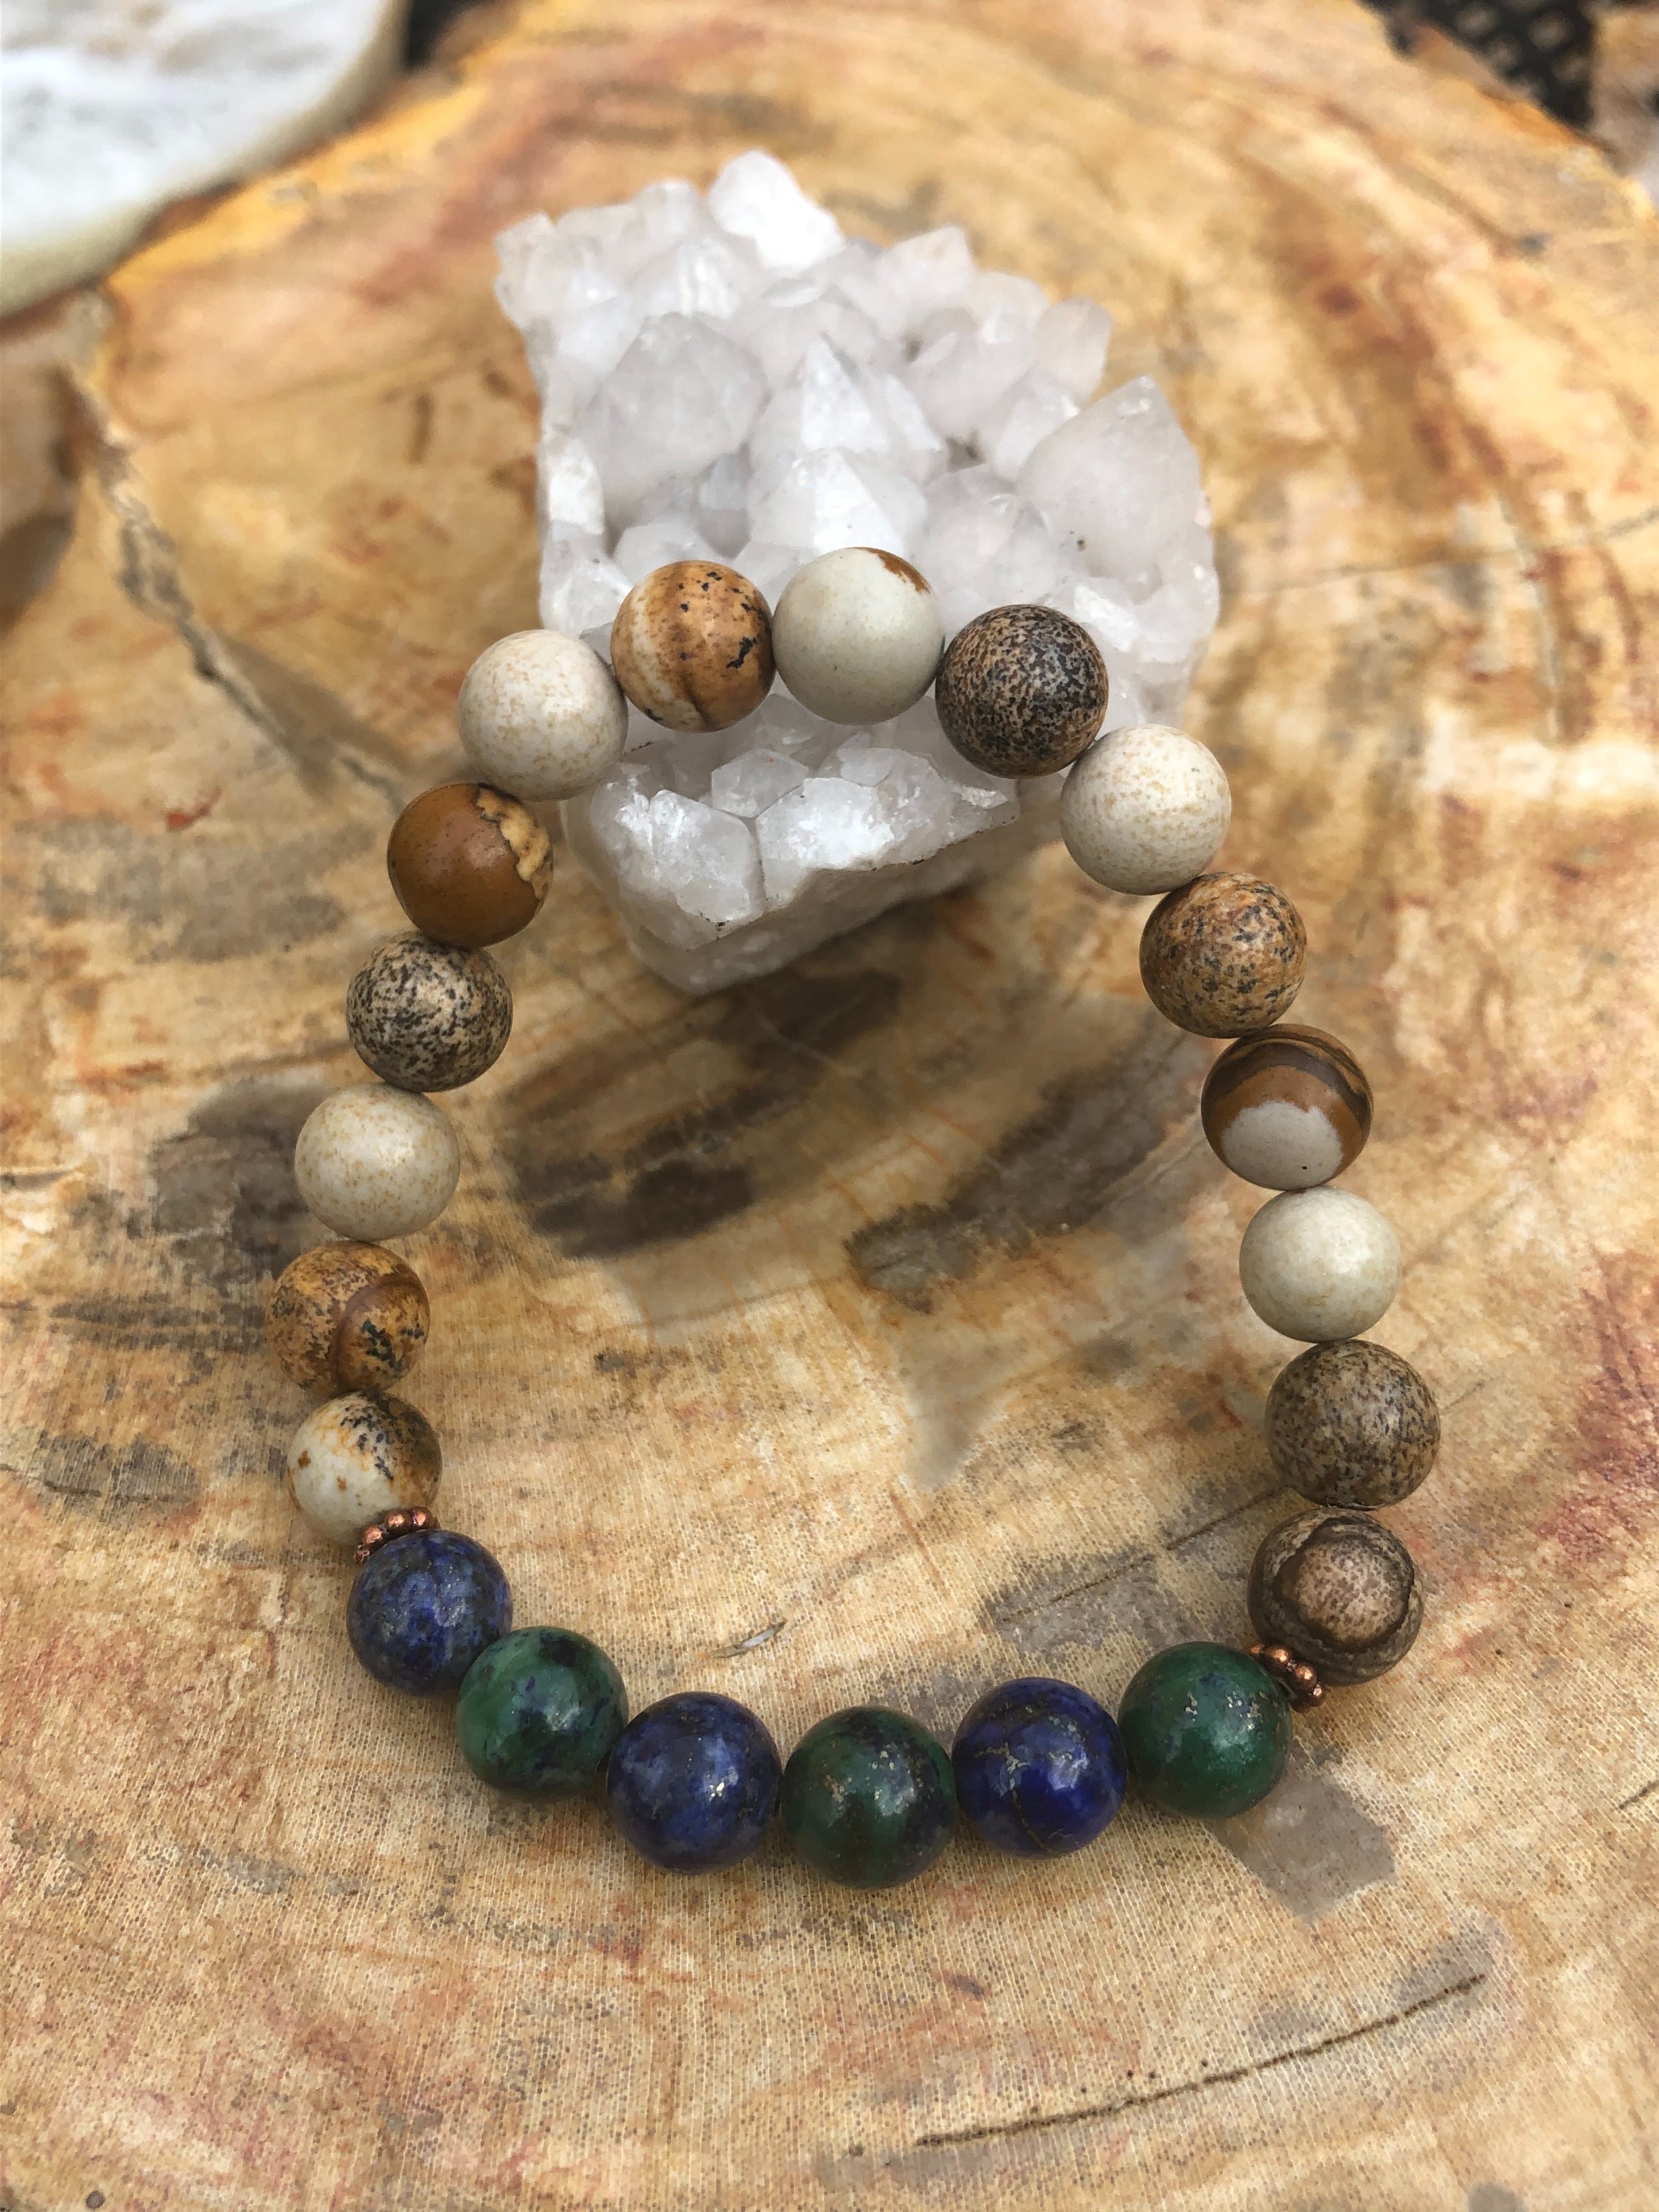 Malachite Chrysocolla & Picture Jasper Bracelet - Promotes Balance, Love, and Protection - Rare Stone Combination from Namibia - Zodiac Influences for Multiple Signs - Handmade in USA - Bracelets - Bijou Her -  -  - 